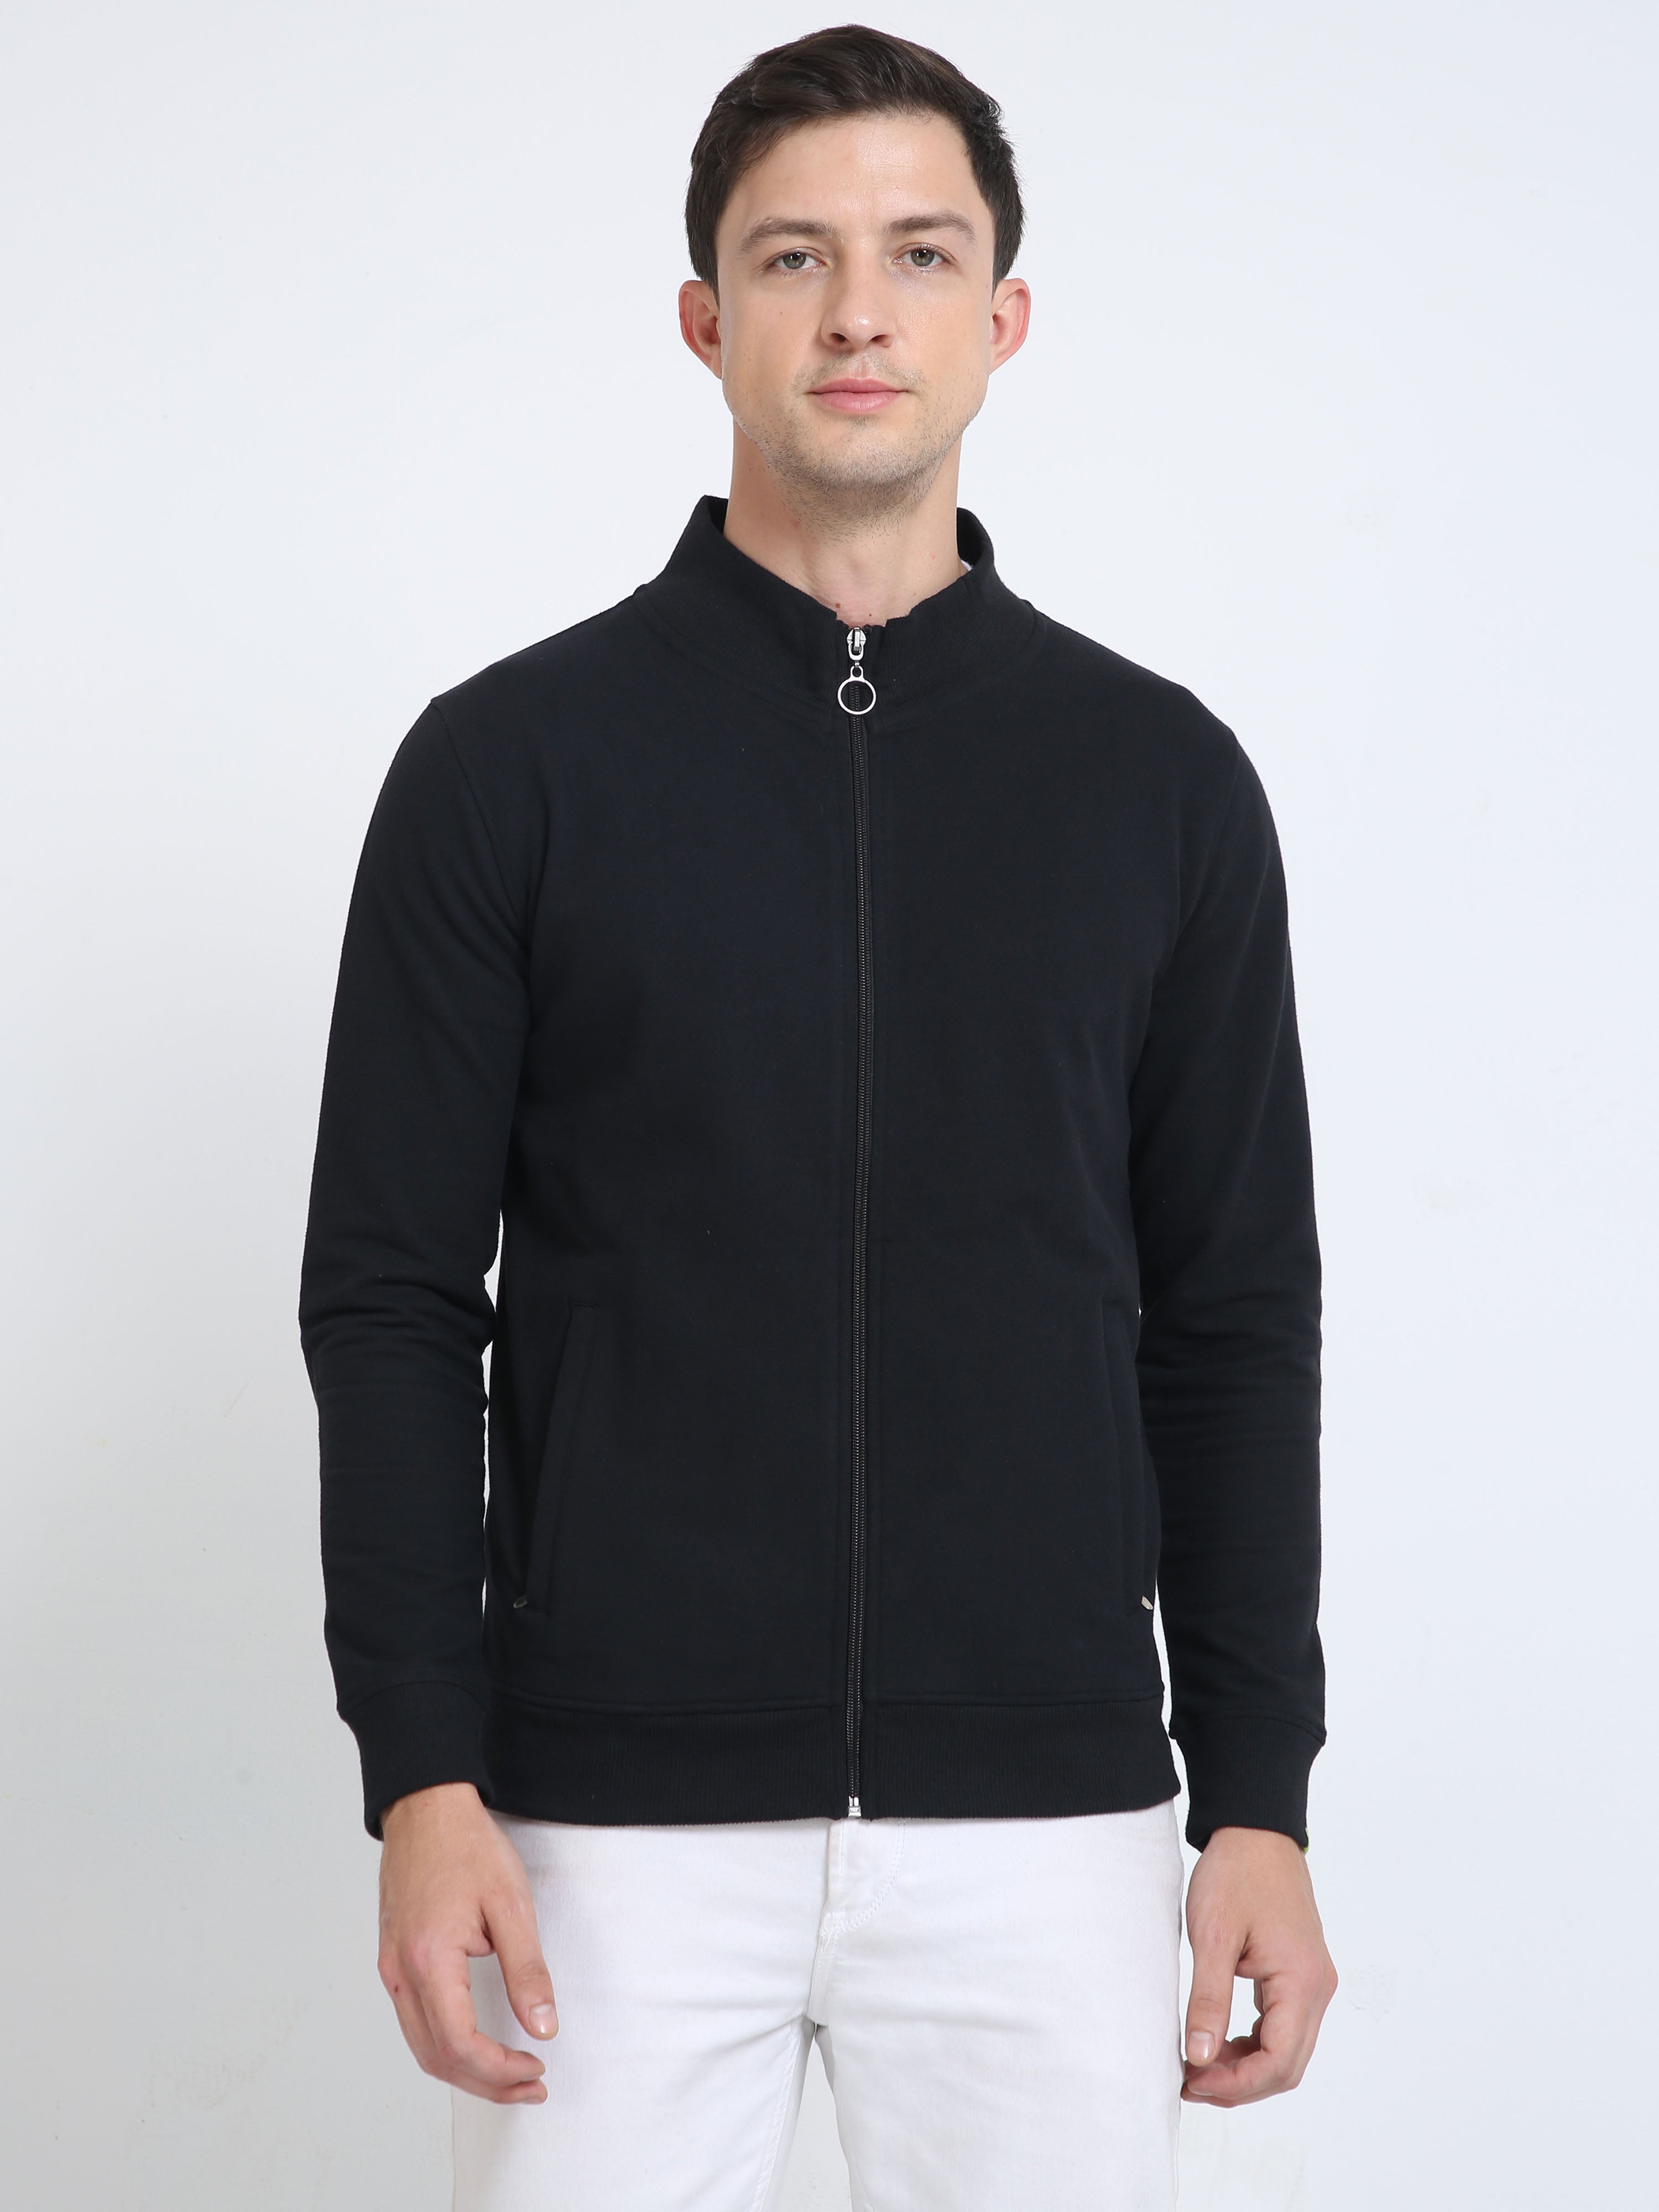 Buy Black Sustainable Jacket Men's Online At Freat Price – Caslay